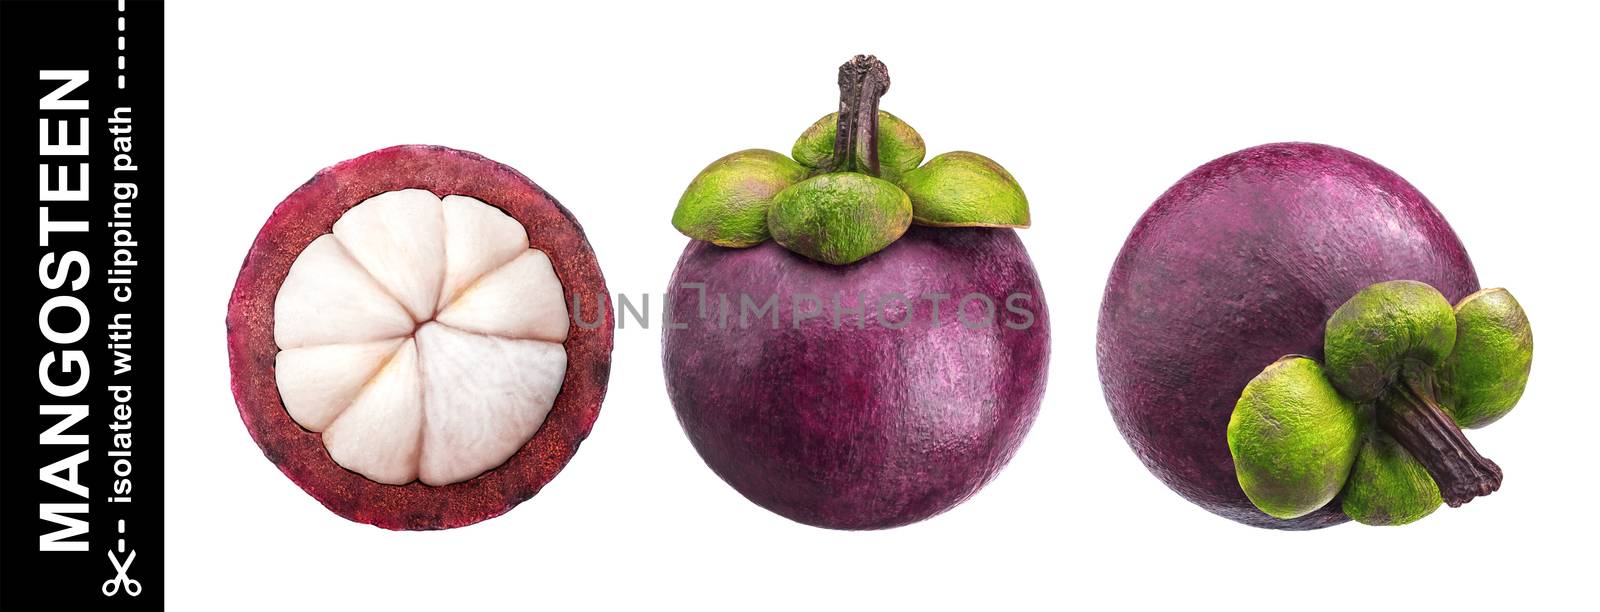 Mangosteen isolated on white background with clipping path